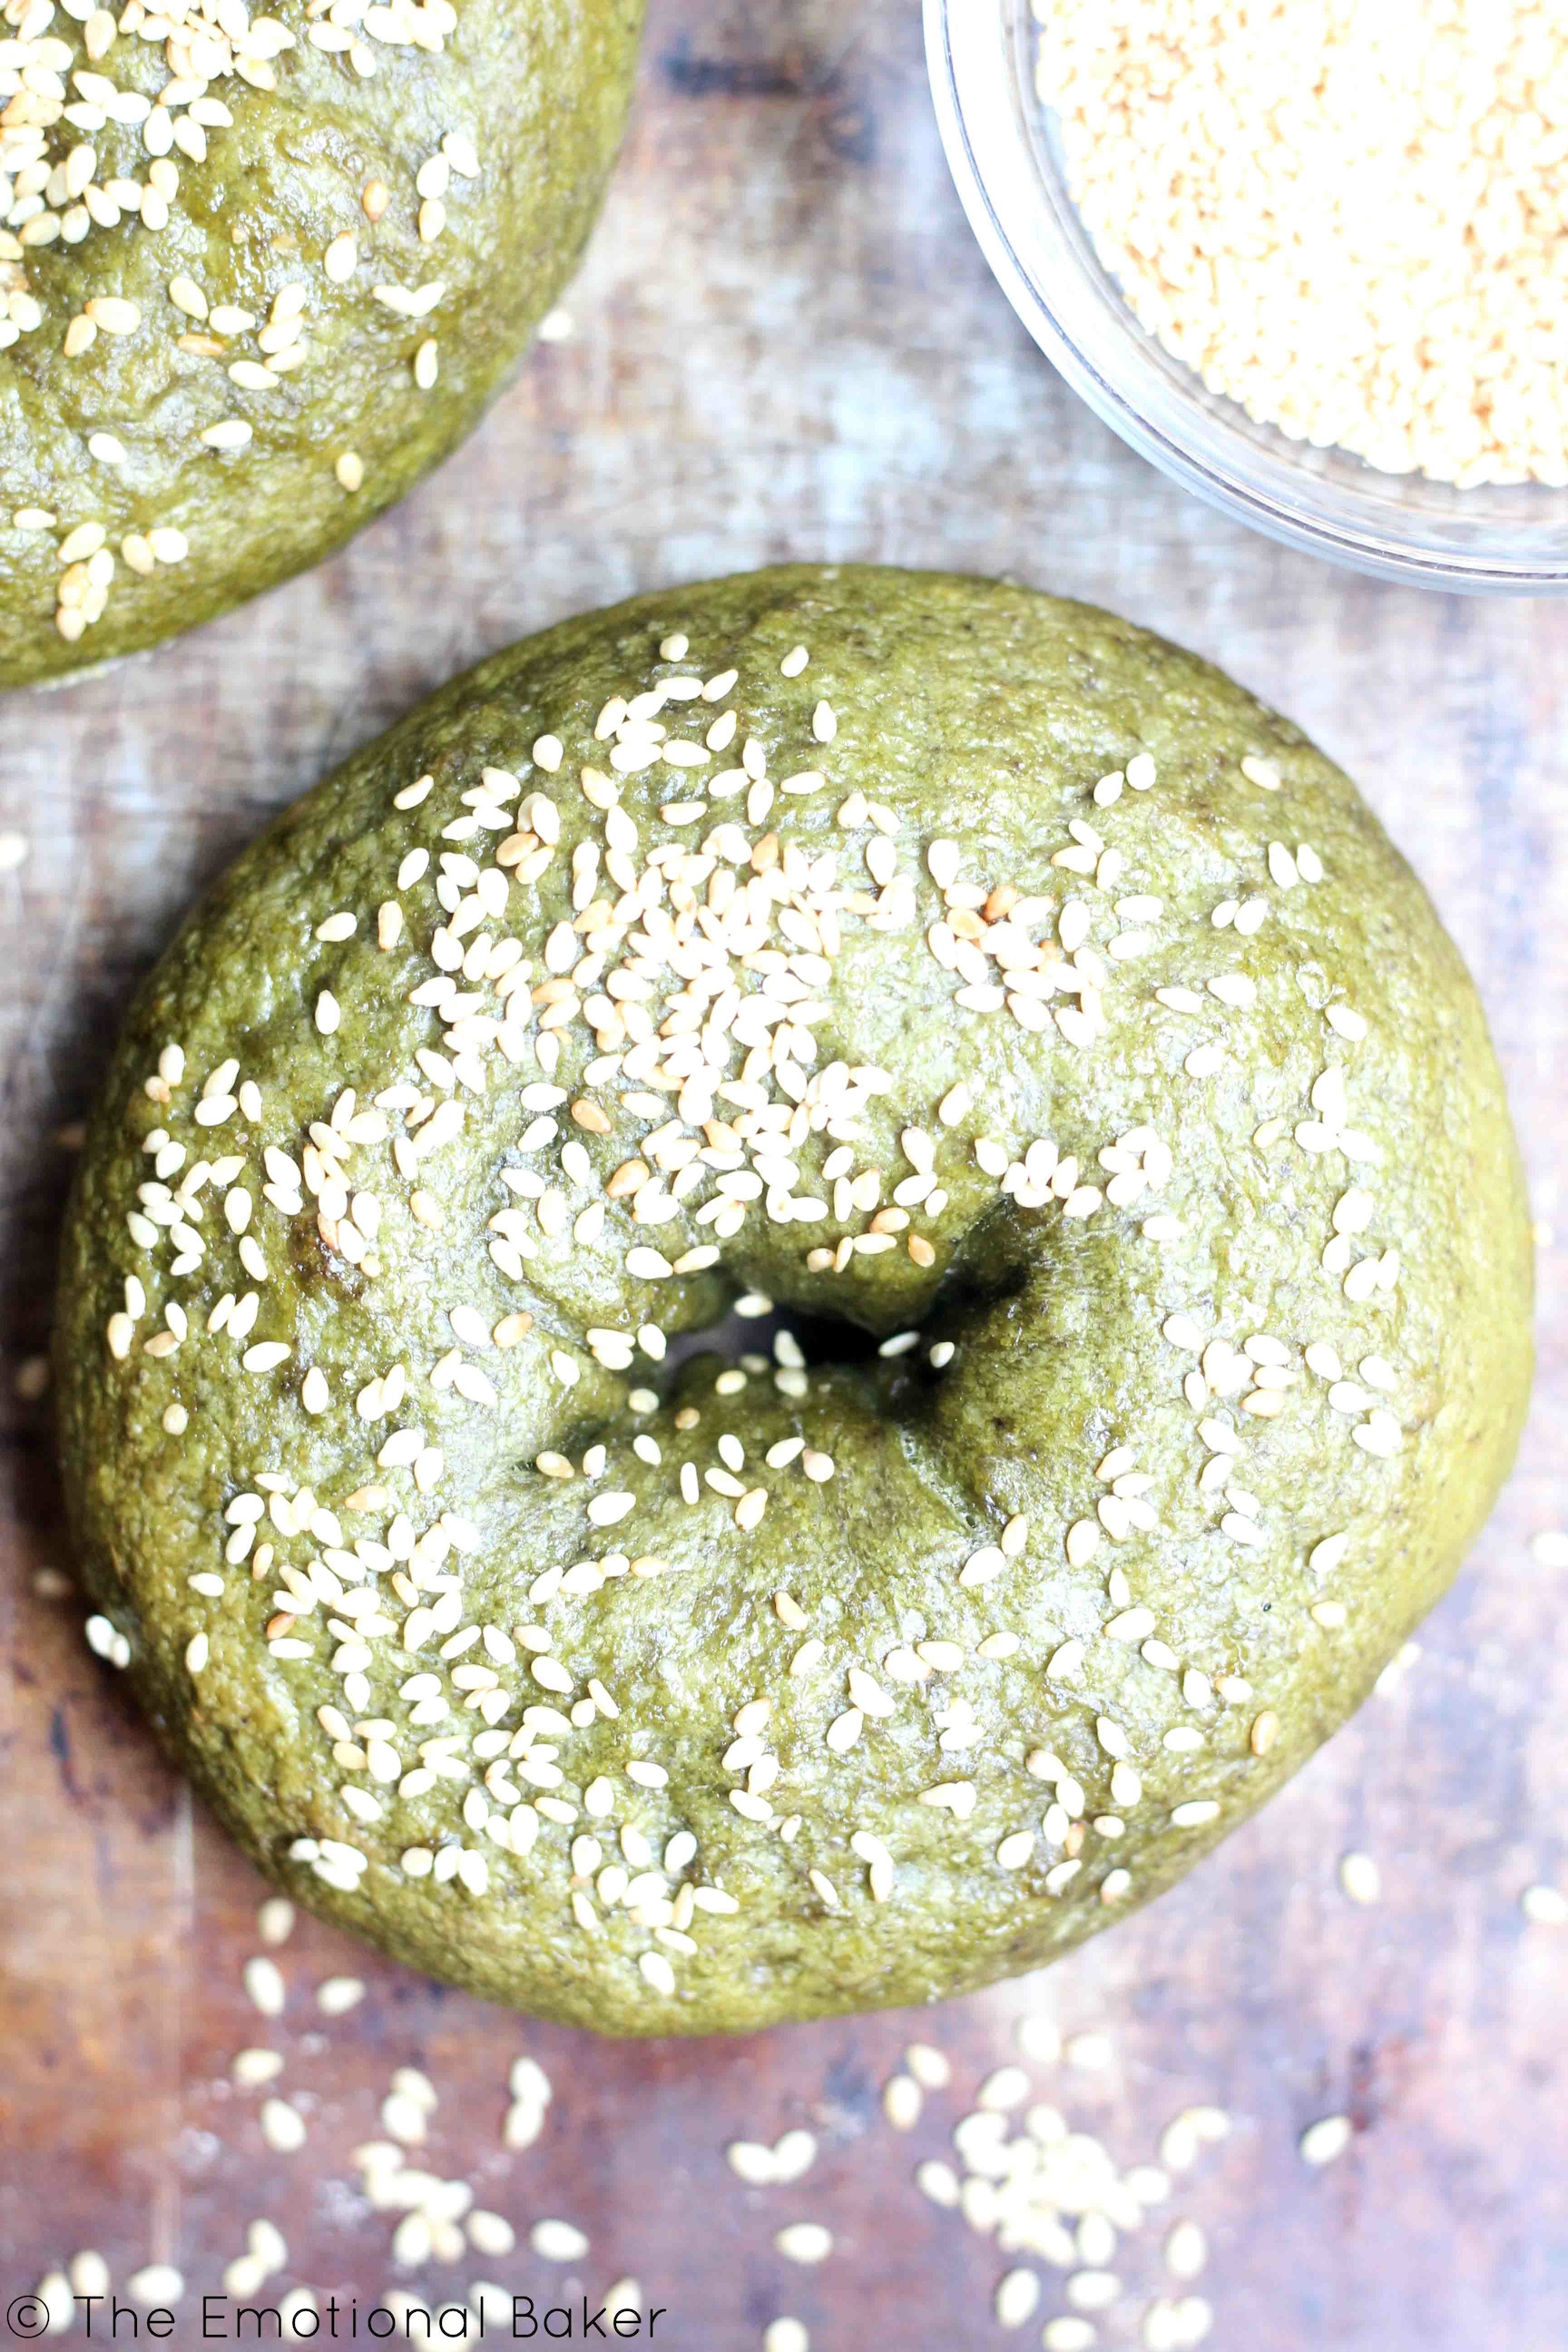 Matcha Sourdough Bagels -- You can make bagels at home! Easy recipe featuring matcha powder and sourdough starter.